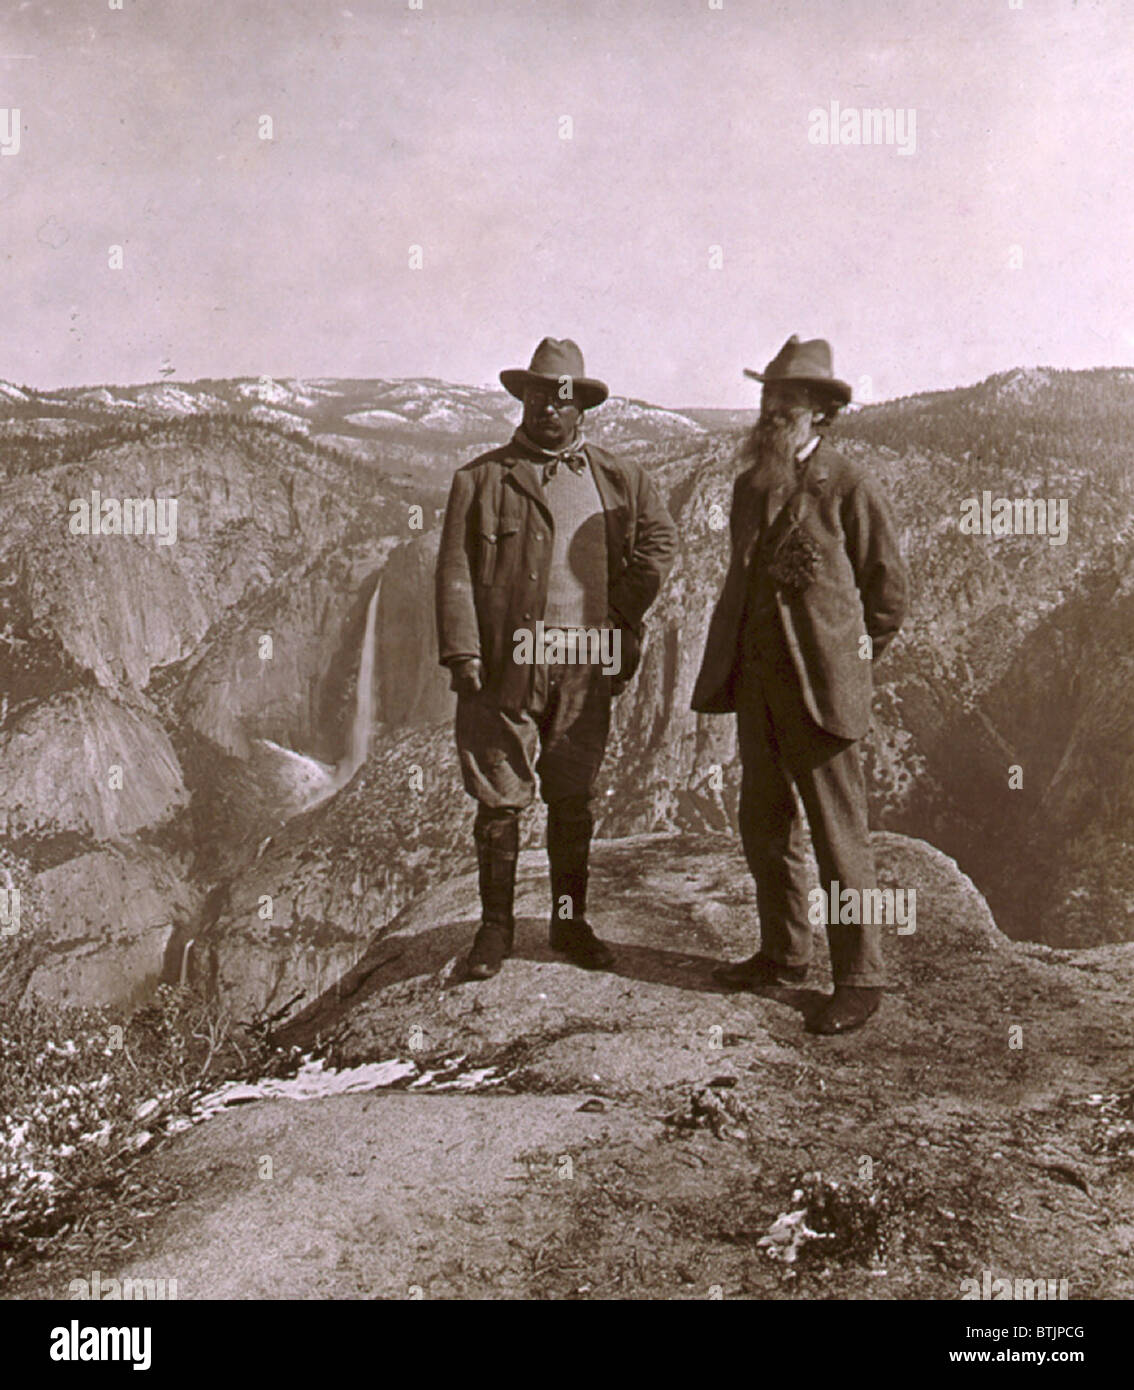 John Muir advocated conservation programs adopted by President Theodore Roosevelt, who in 1903 accompanied Muir on a camping trip to the Yosemite region. In 1908 the government established the Muir Woods National Monument in Marin County, California. Stock Photo